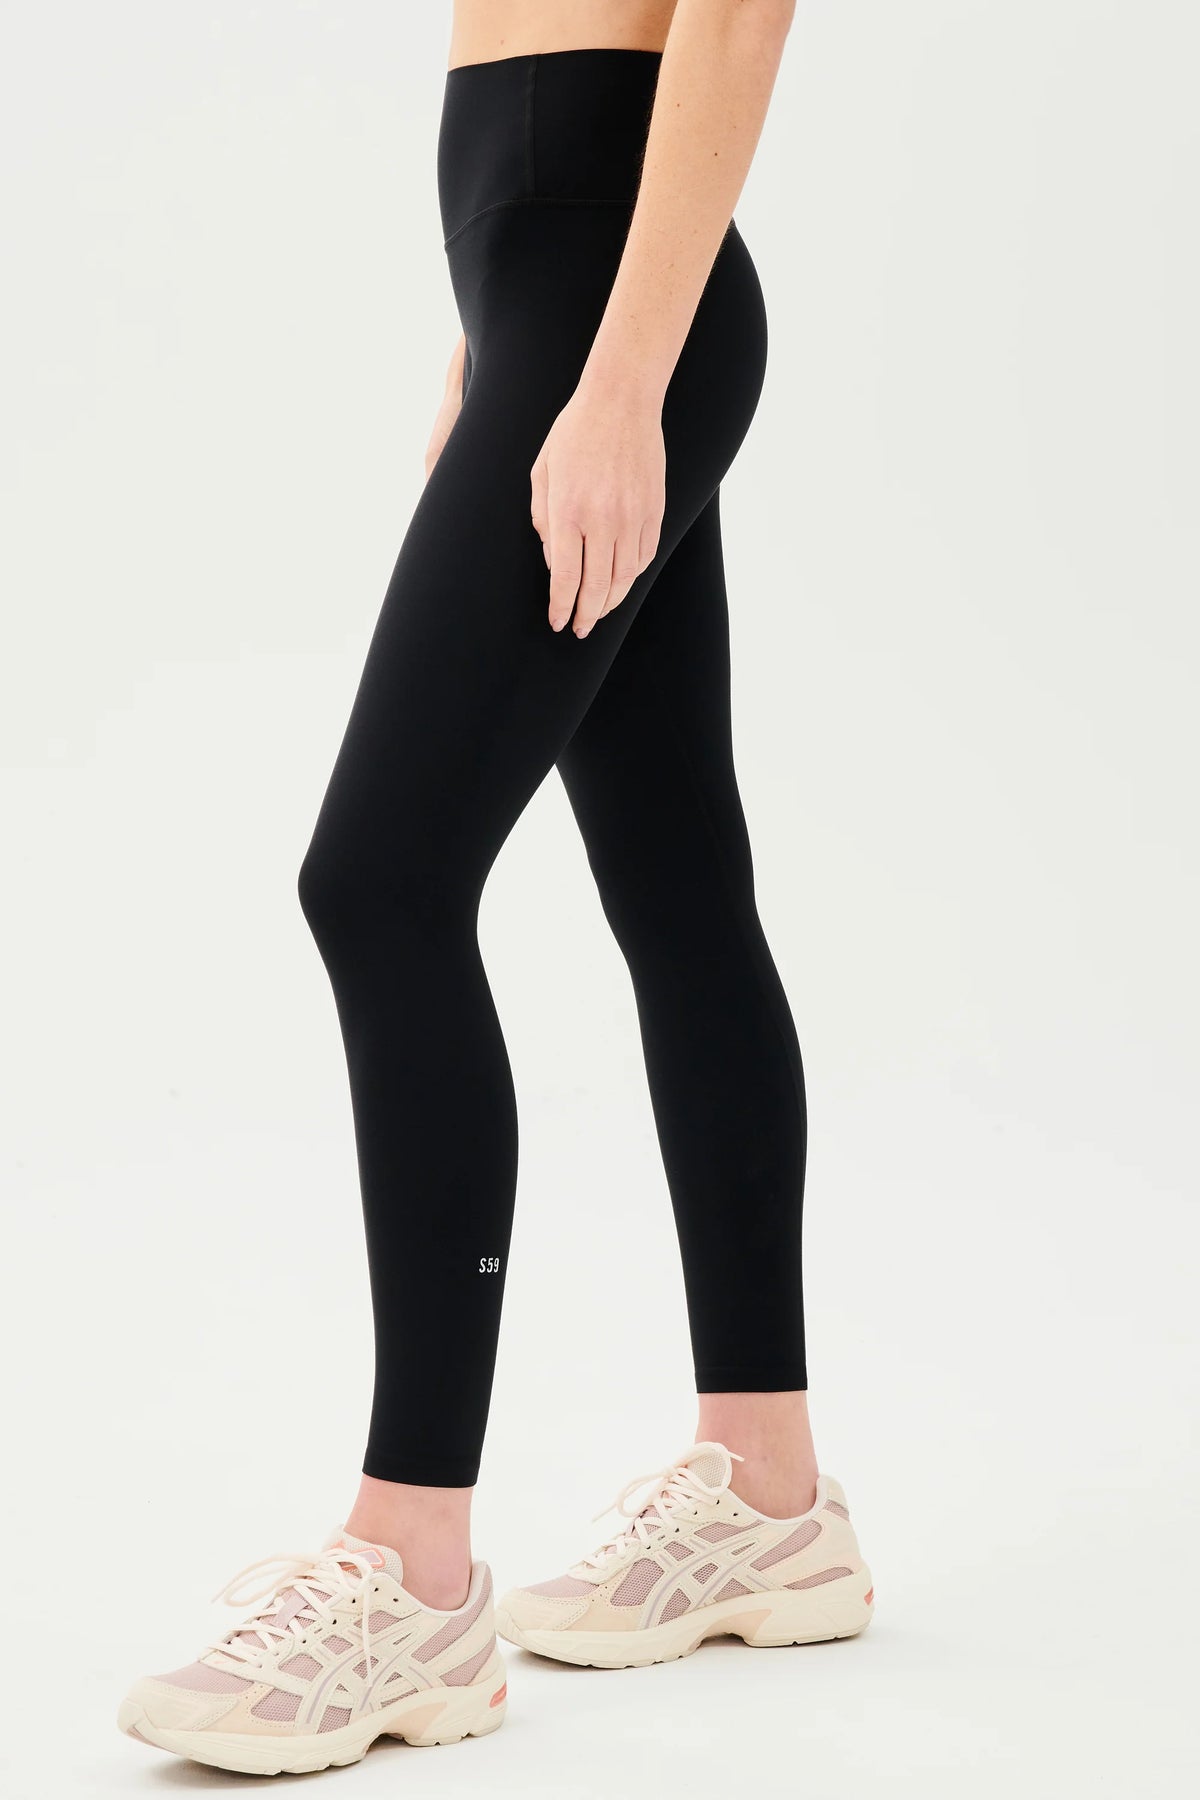 Splits 59 Airweight High Wasited Legging 26&quot; - Black